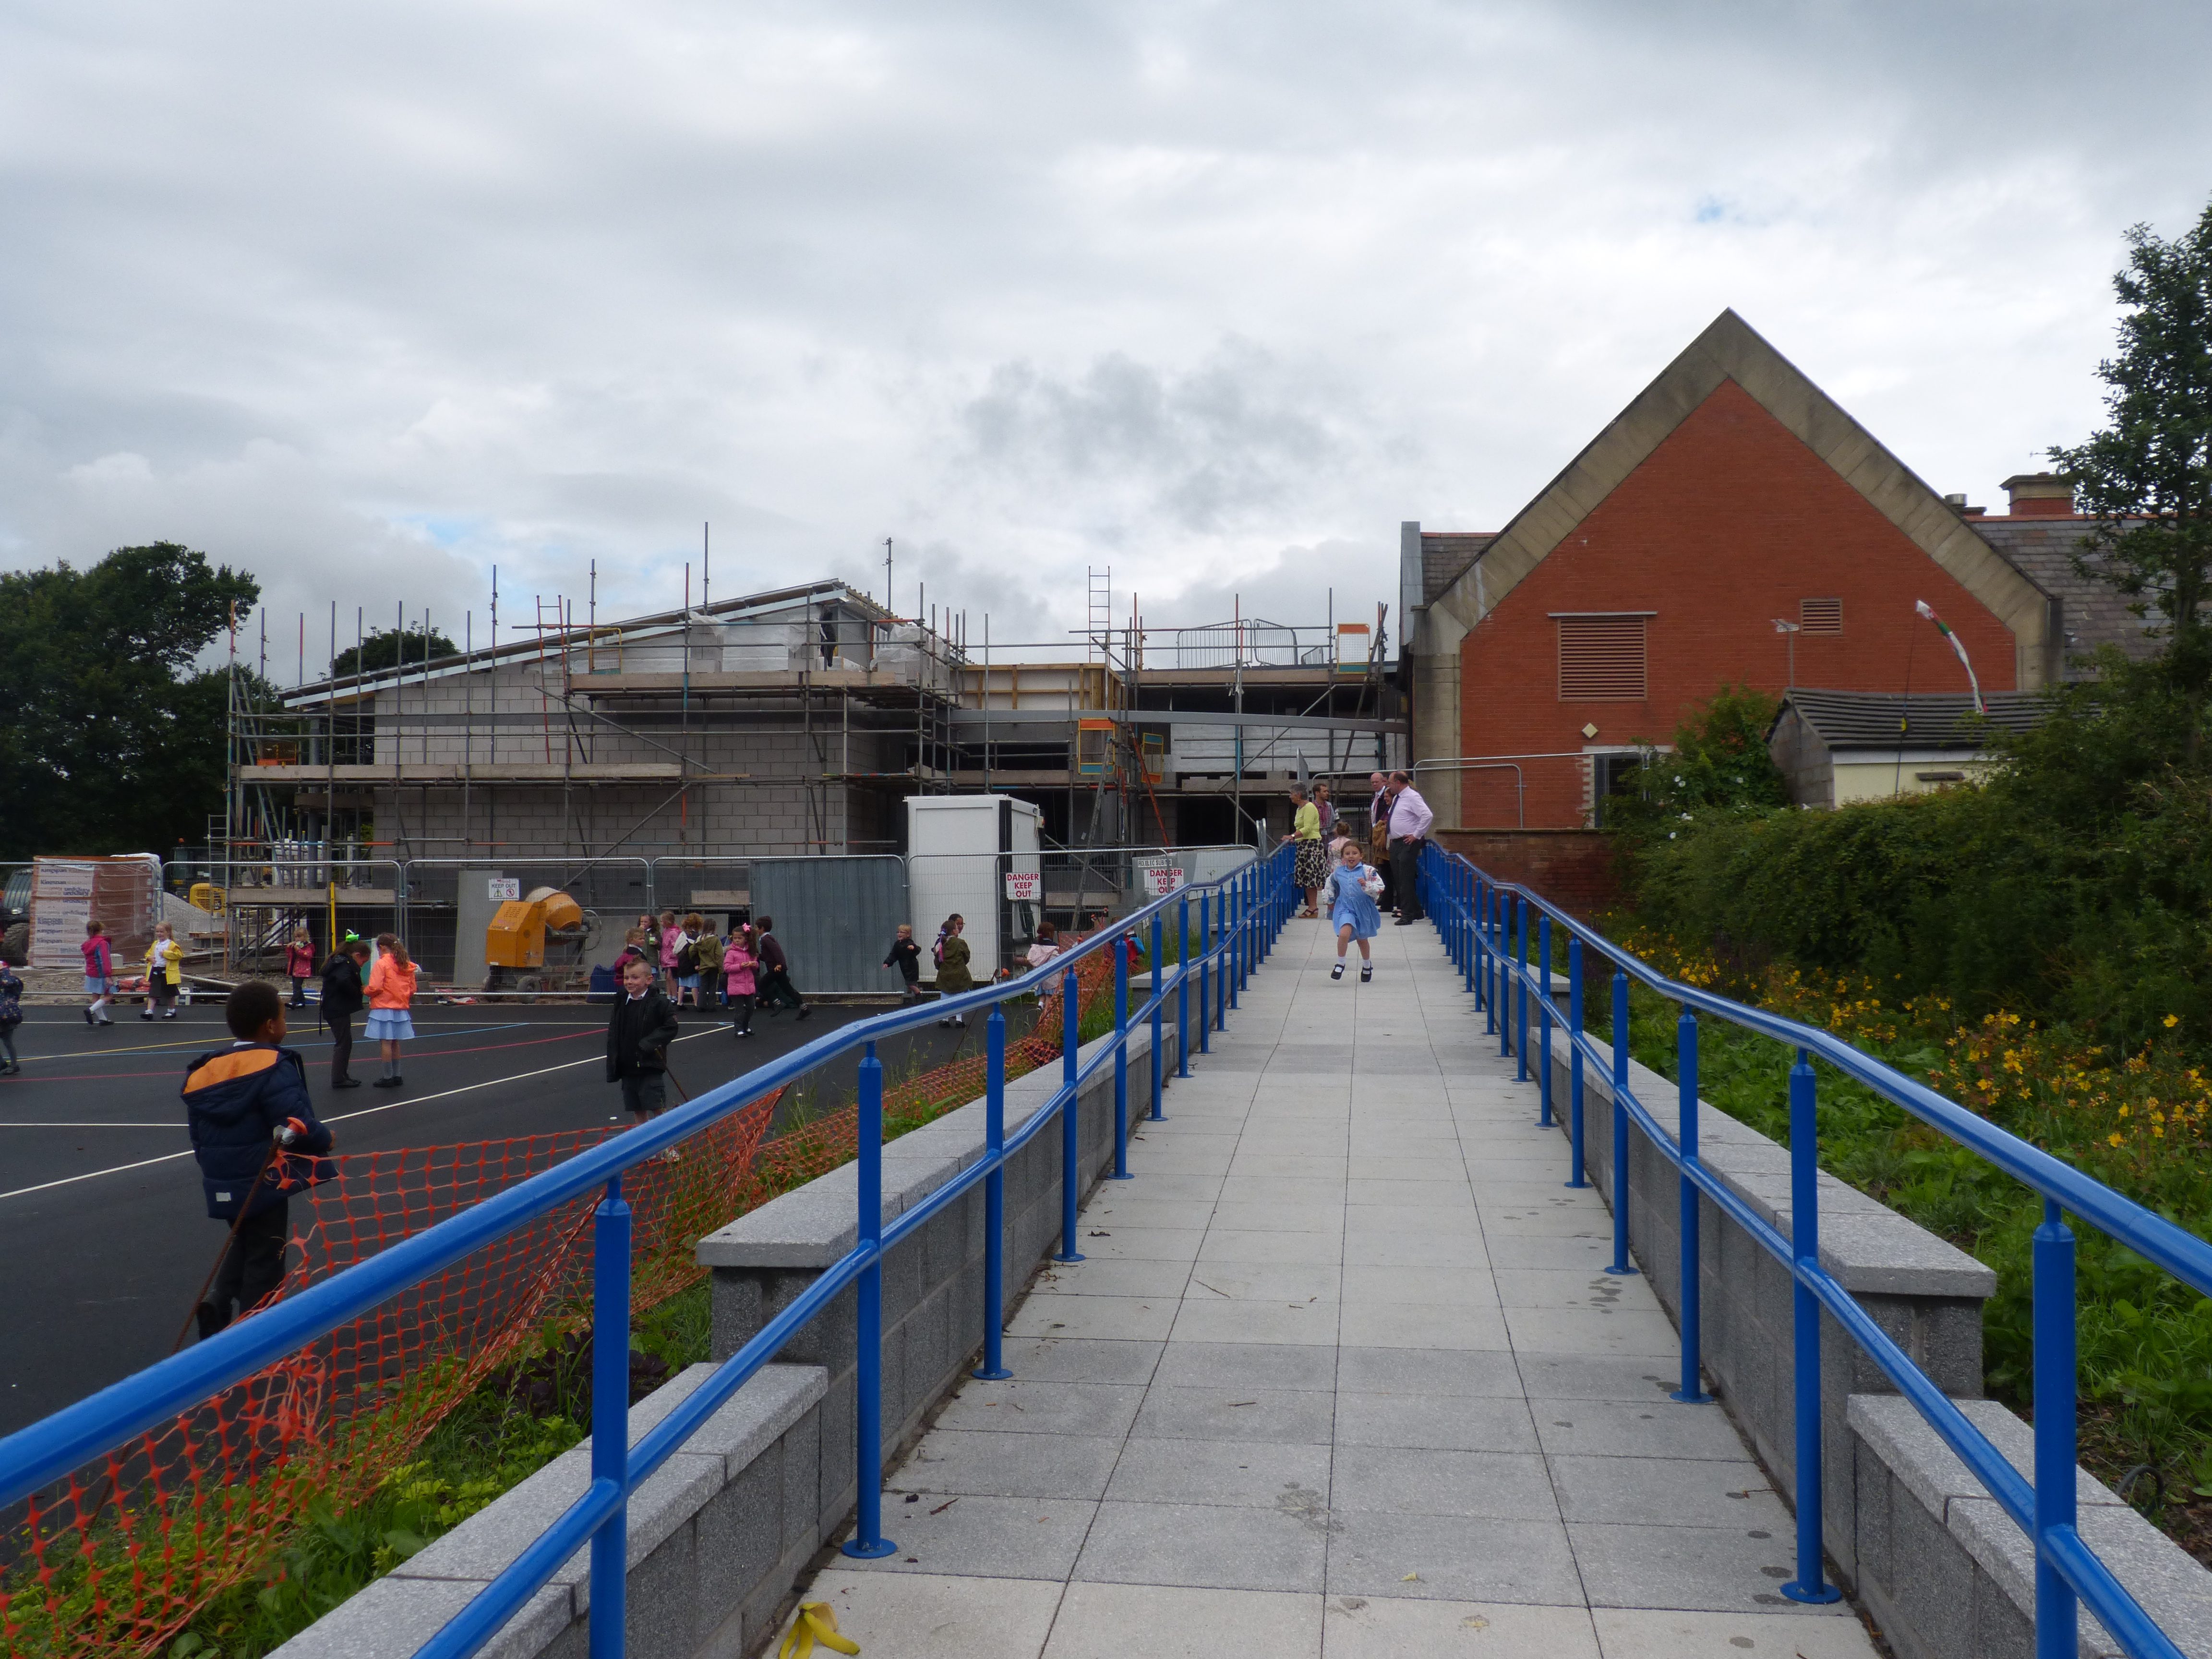 Old meets new at Penycae School